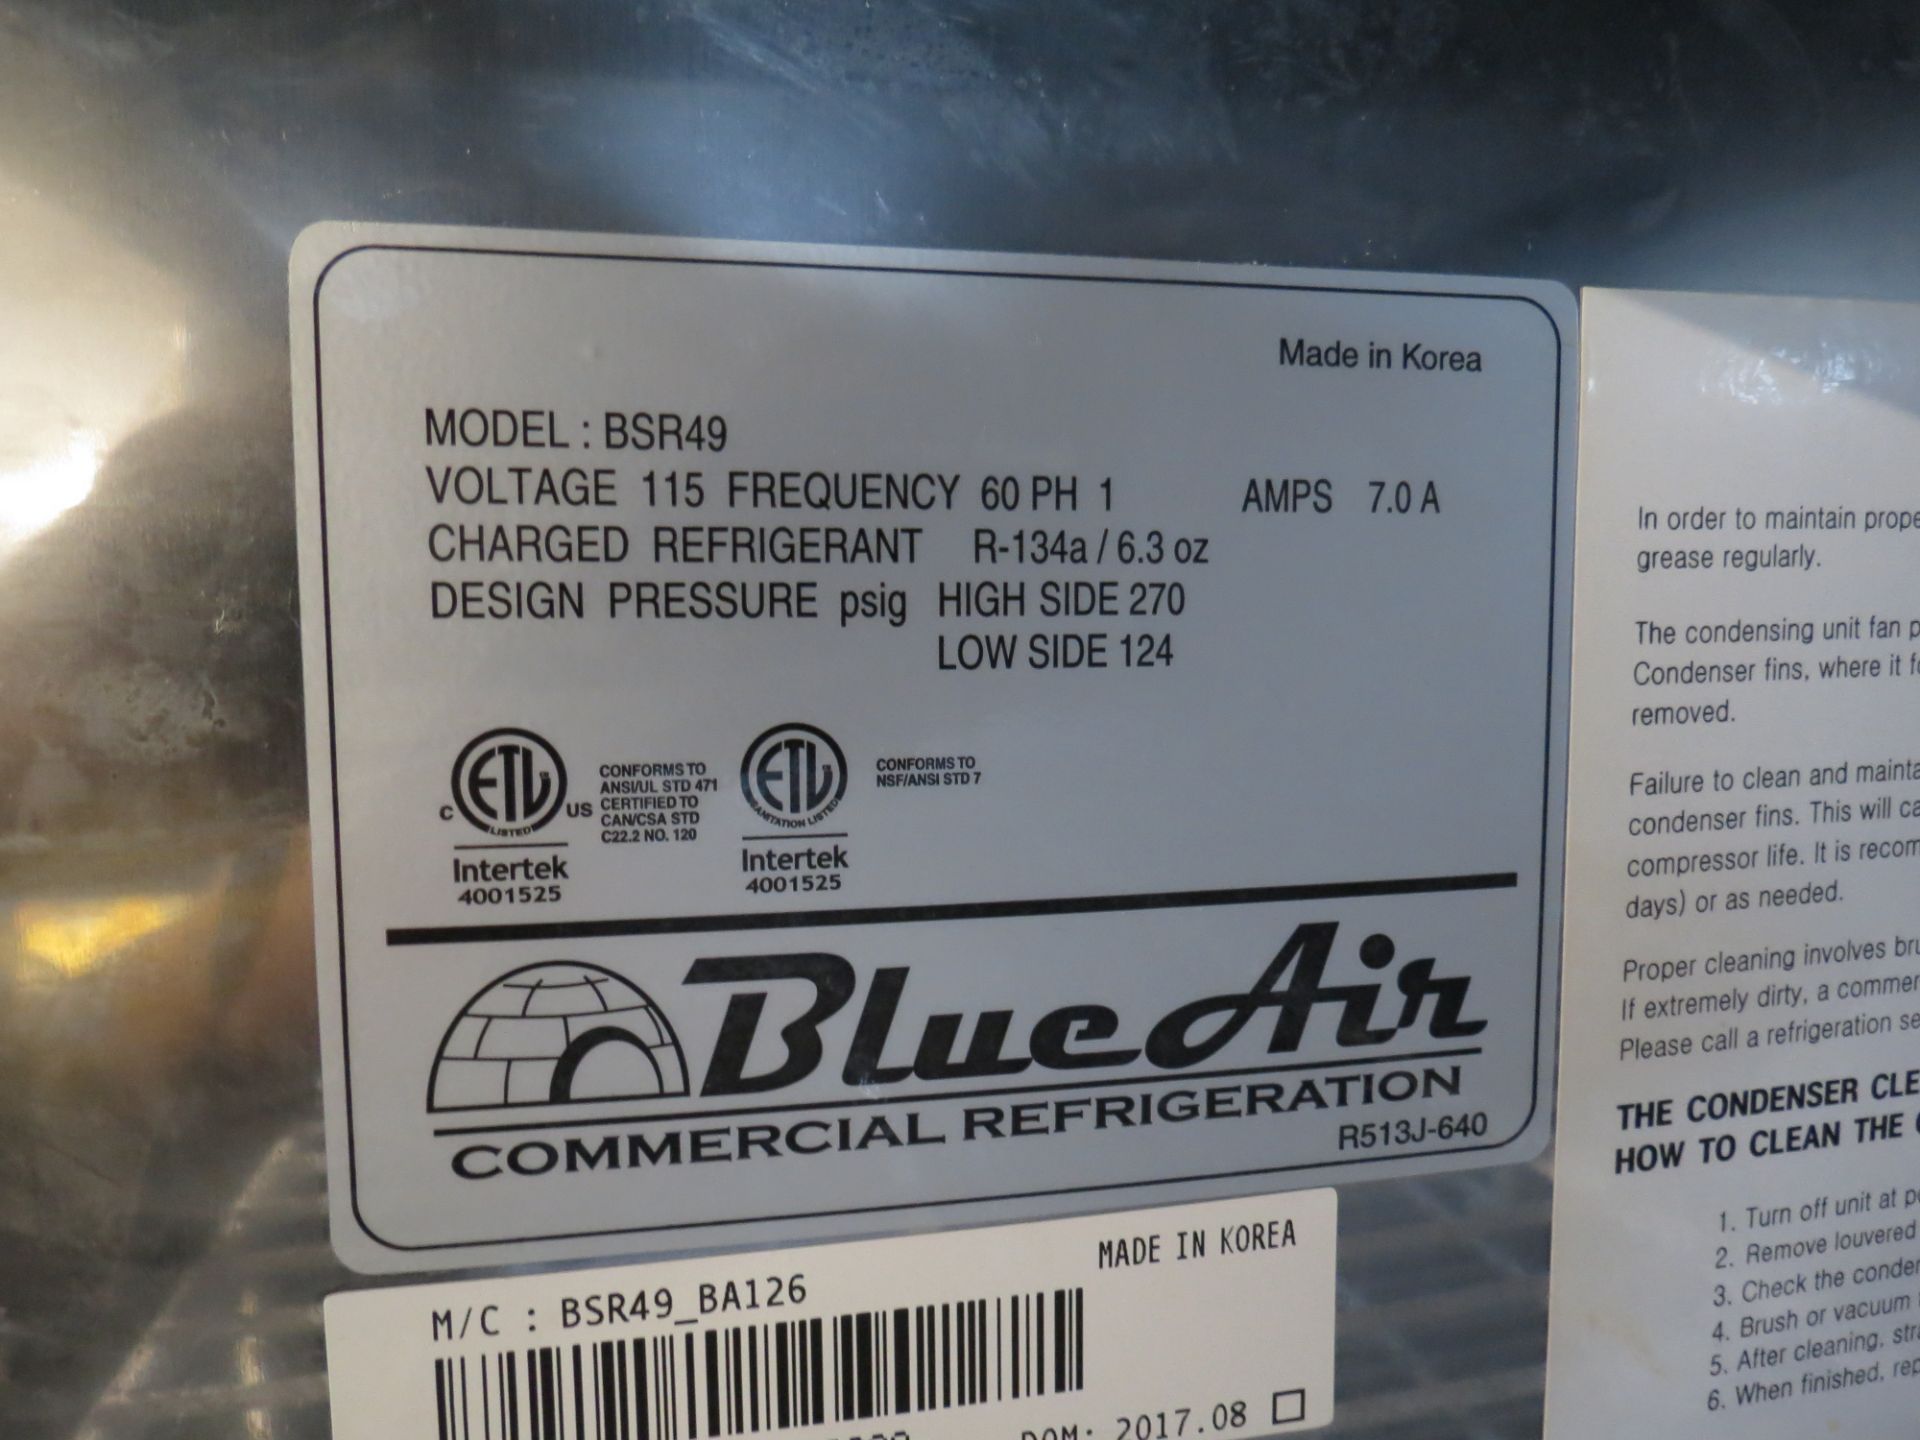 Blue Air Stainless Steel Model BSR49 Commercial Refrigerator with Digital Control - Image 3 of 5